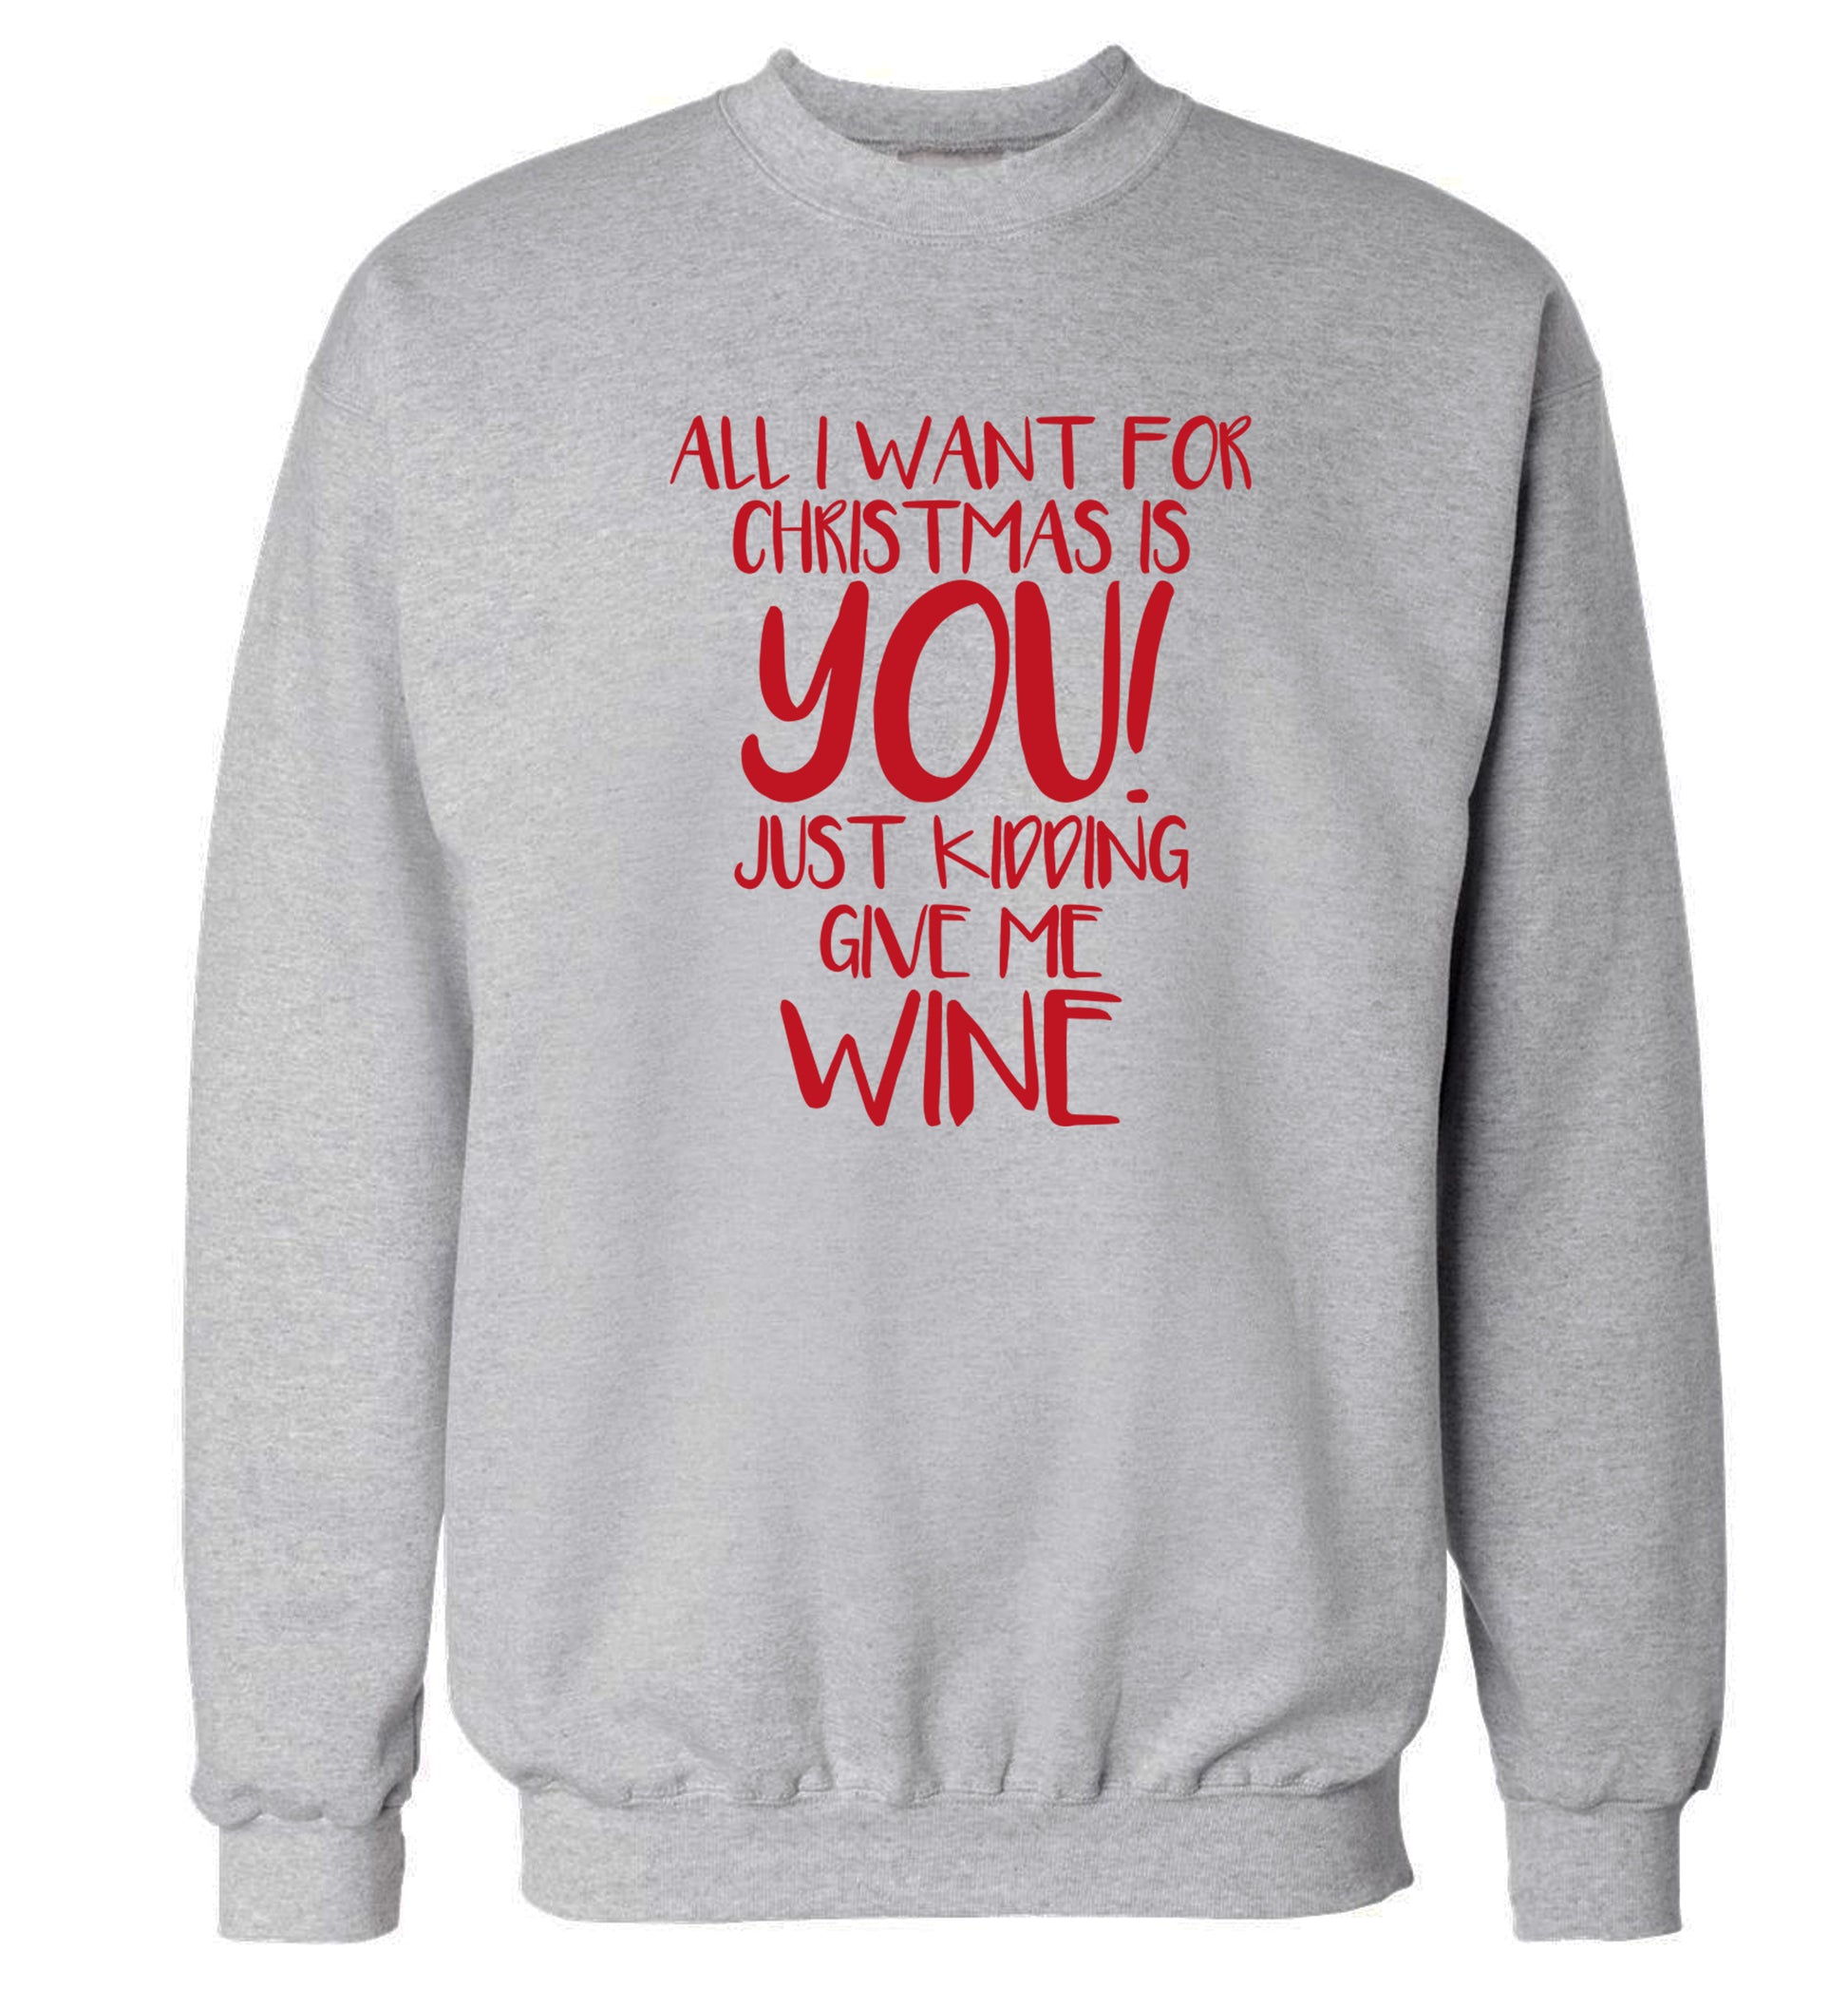 All I want for christmas is you just kidding give me the wine Adult's unisex grey Sweater 2XL